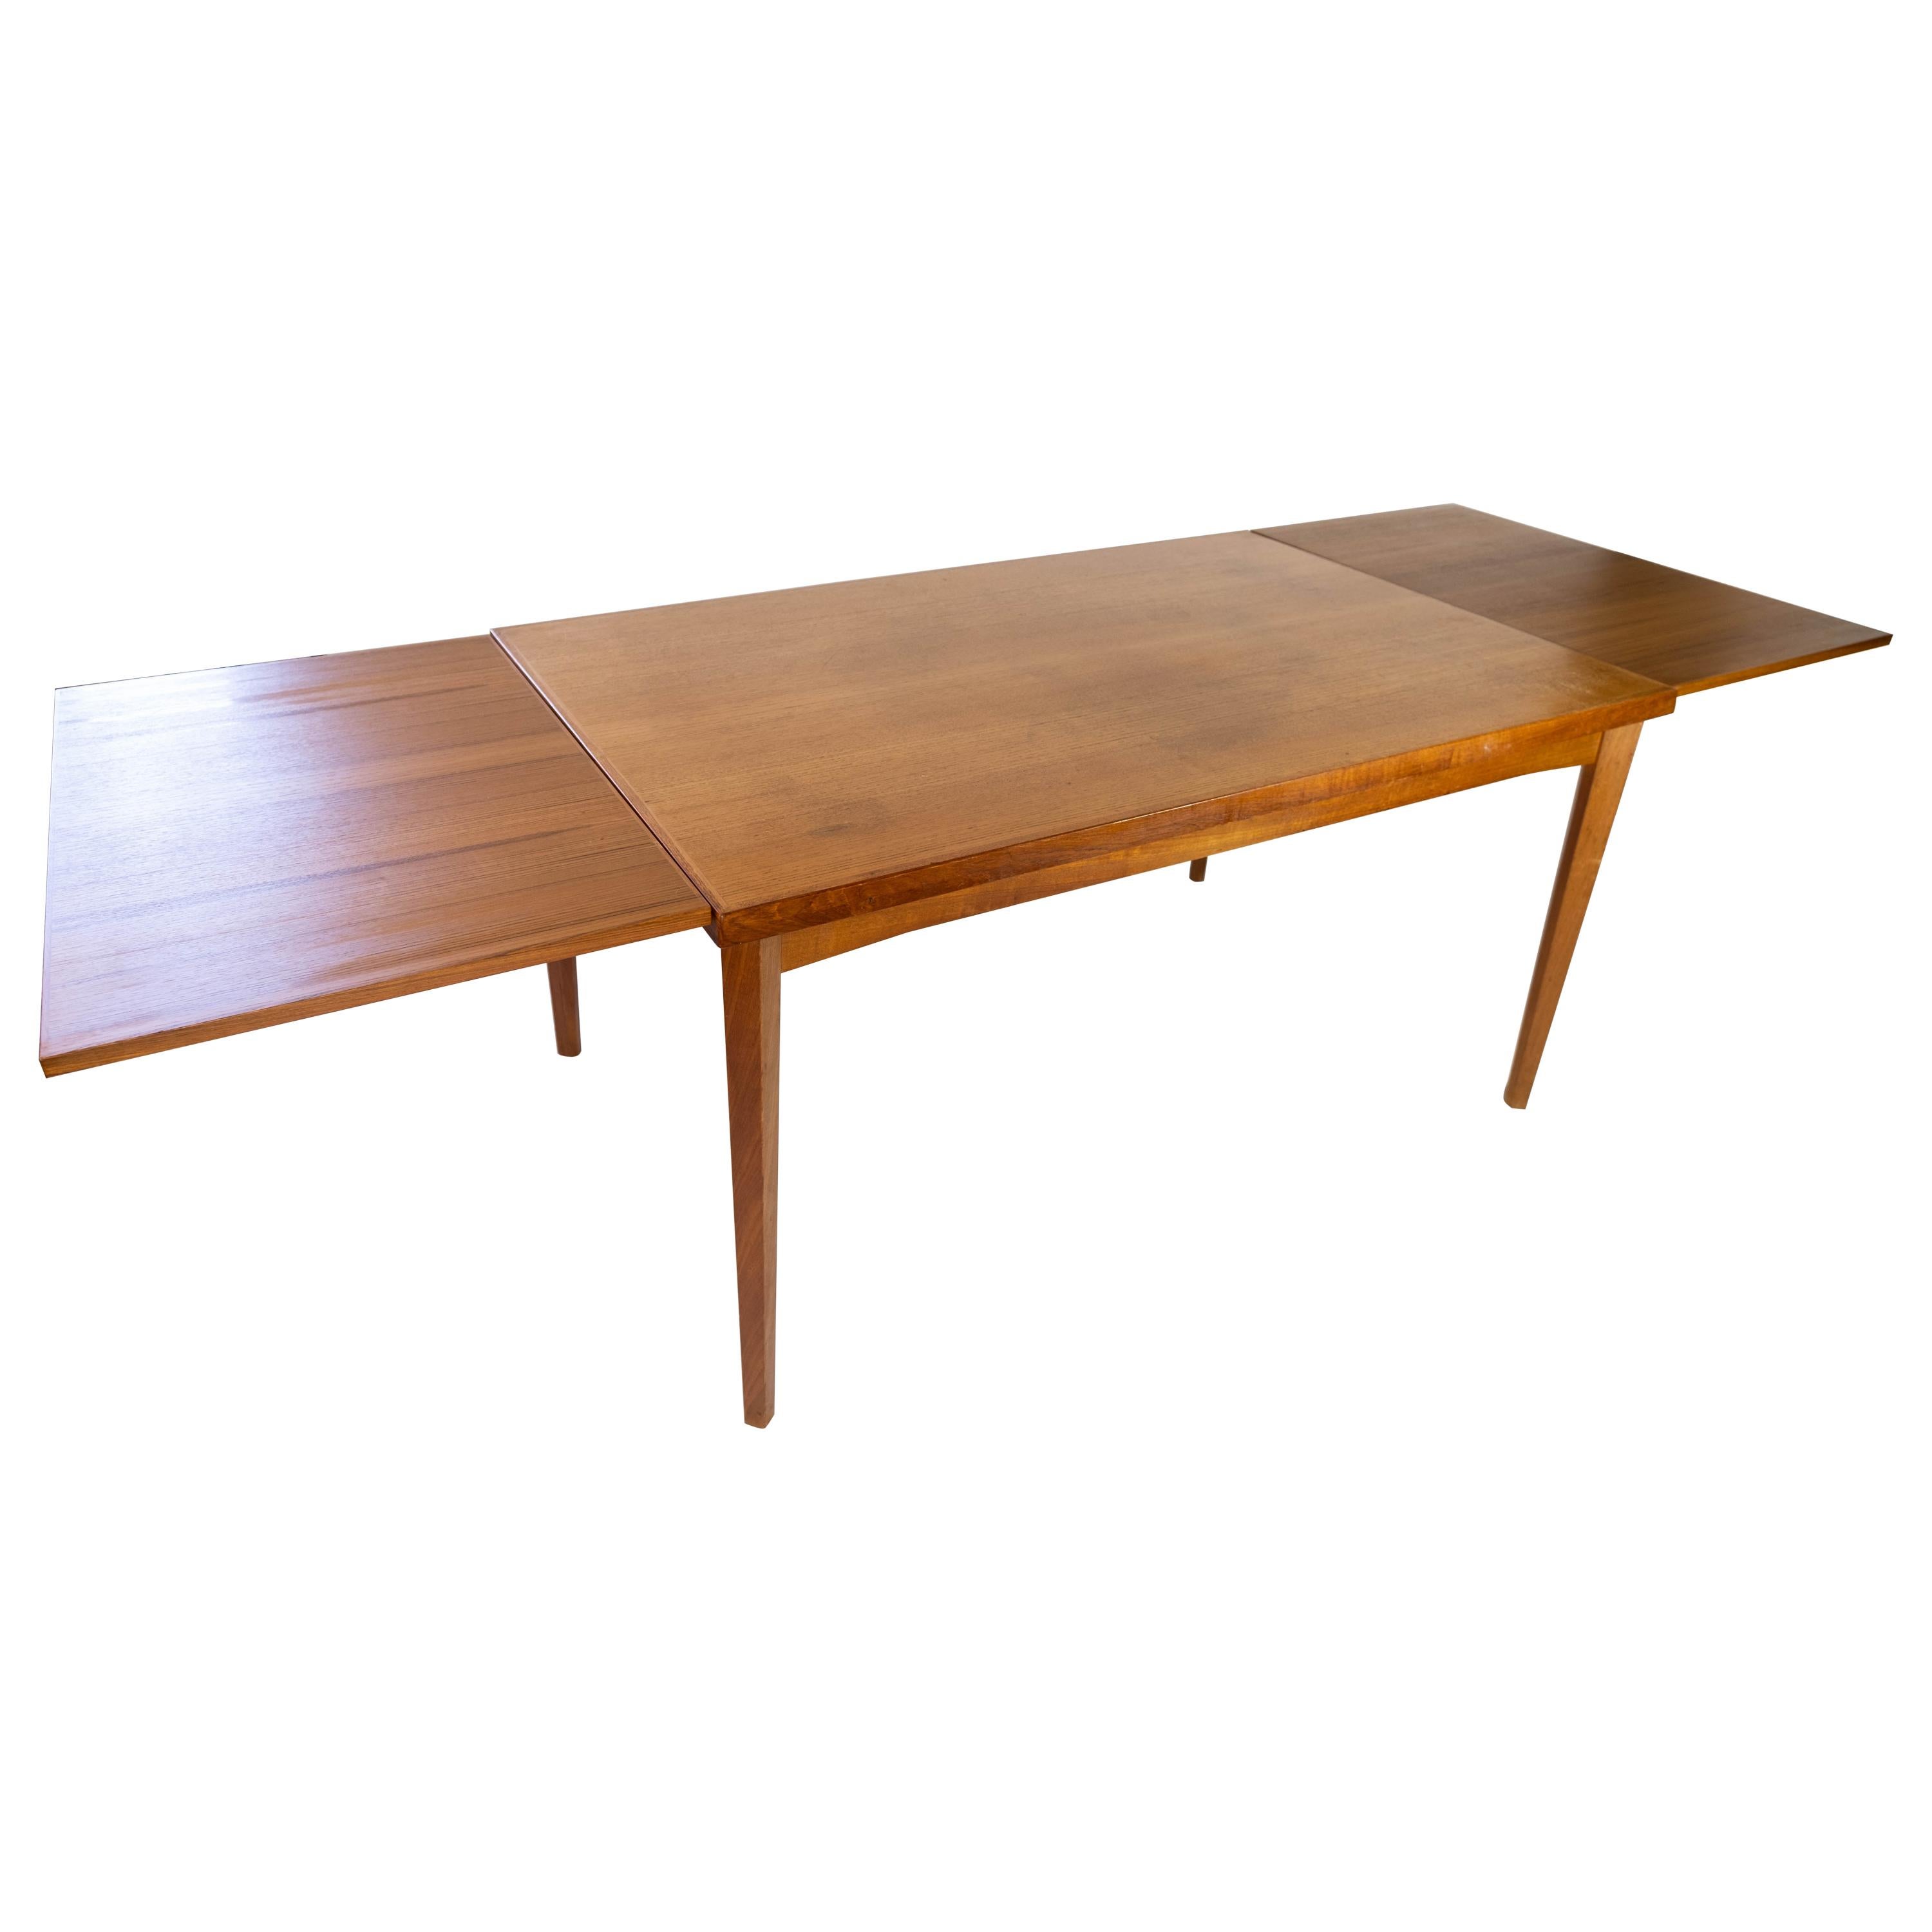 Dining Table With Extensions Made In Teak, Danish Design From 1960s For Sale